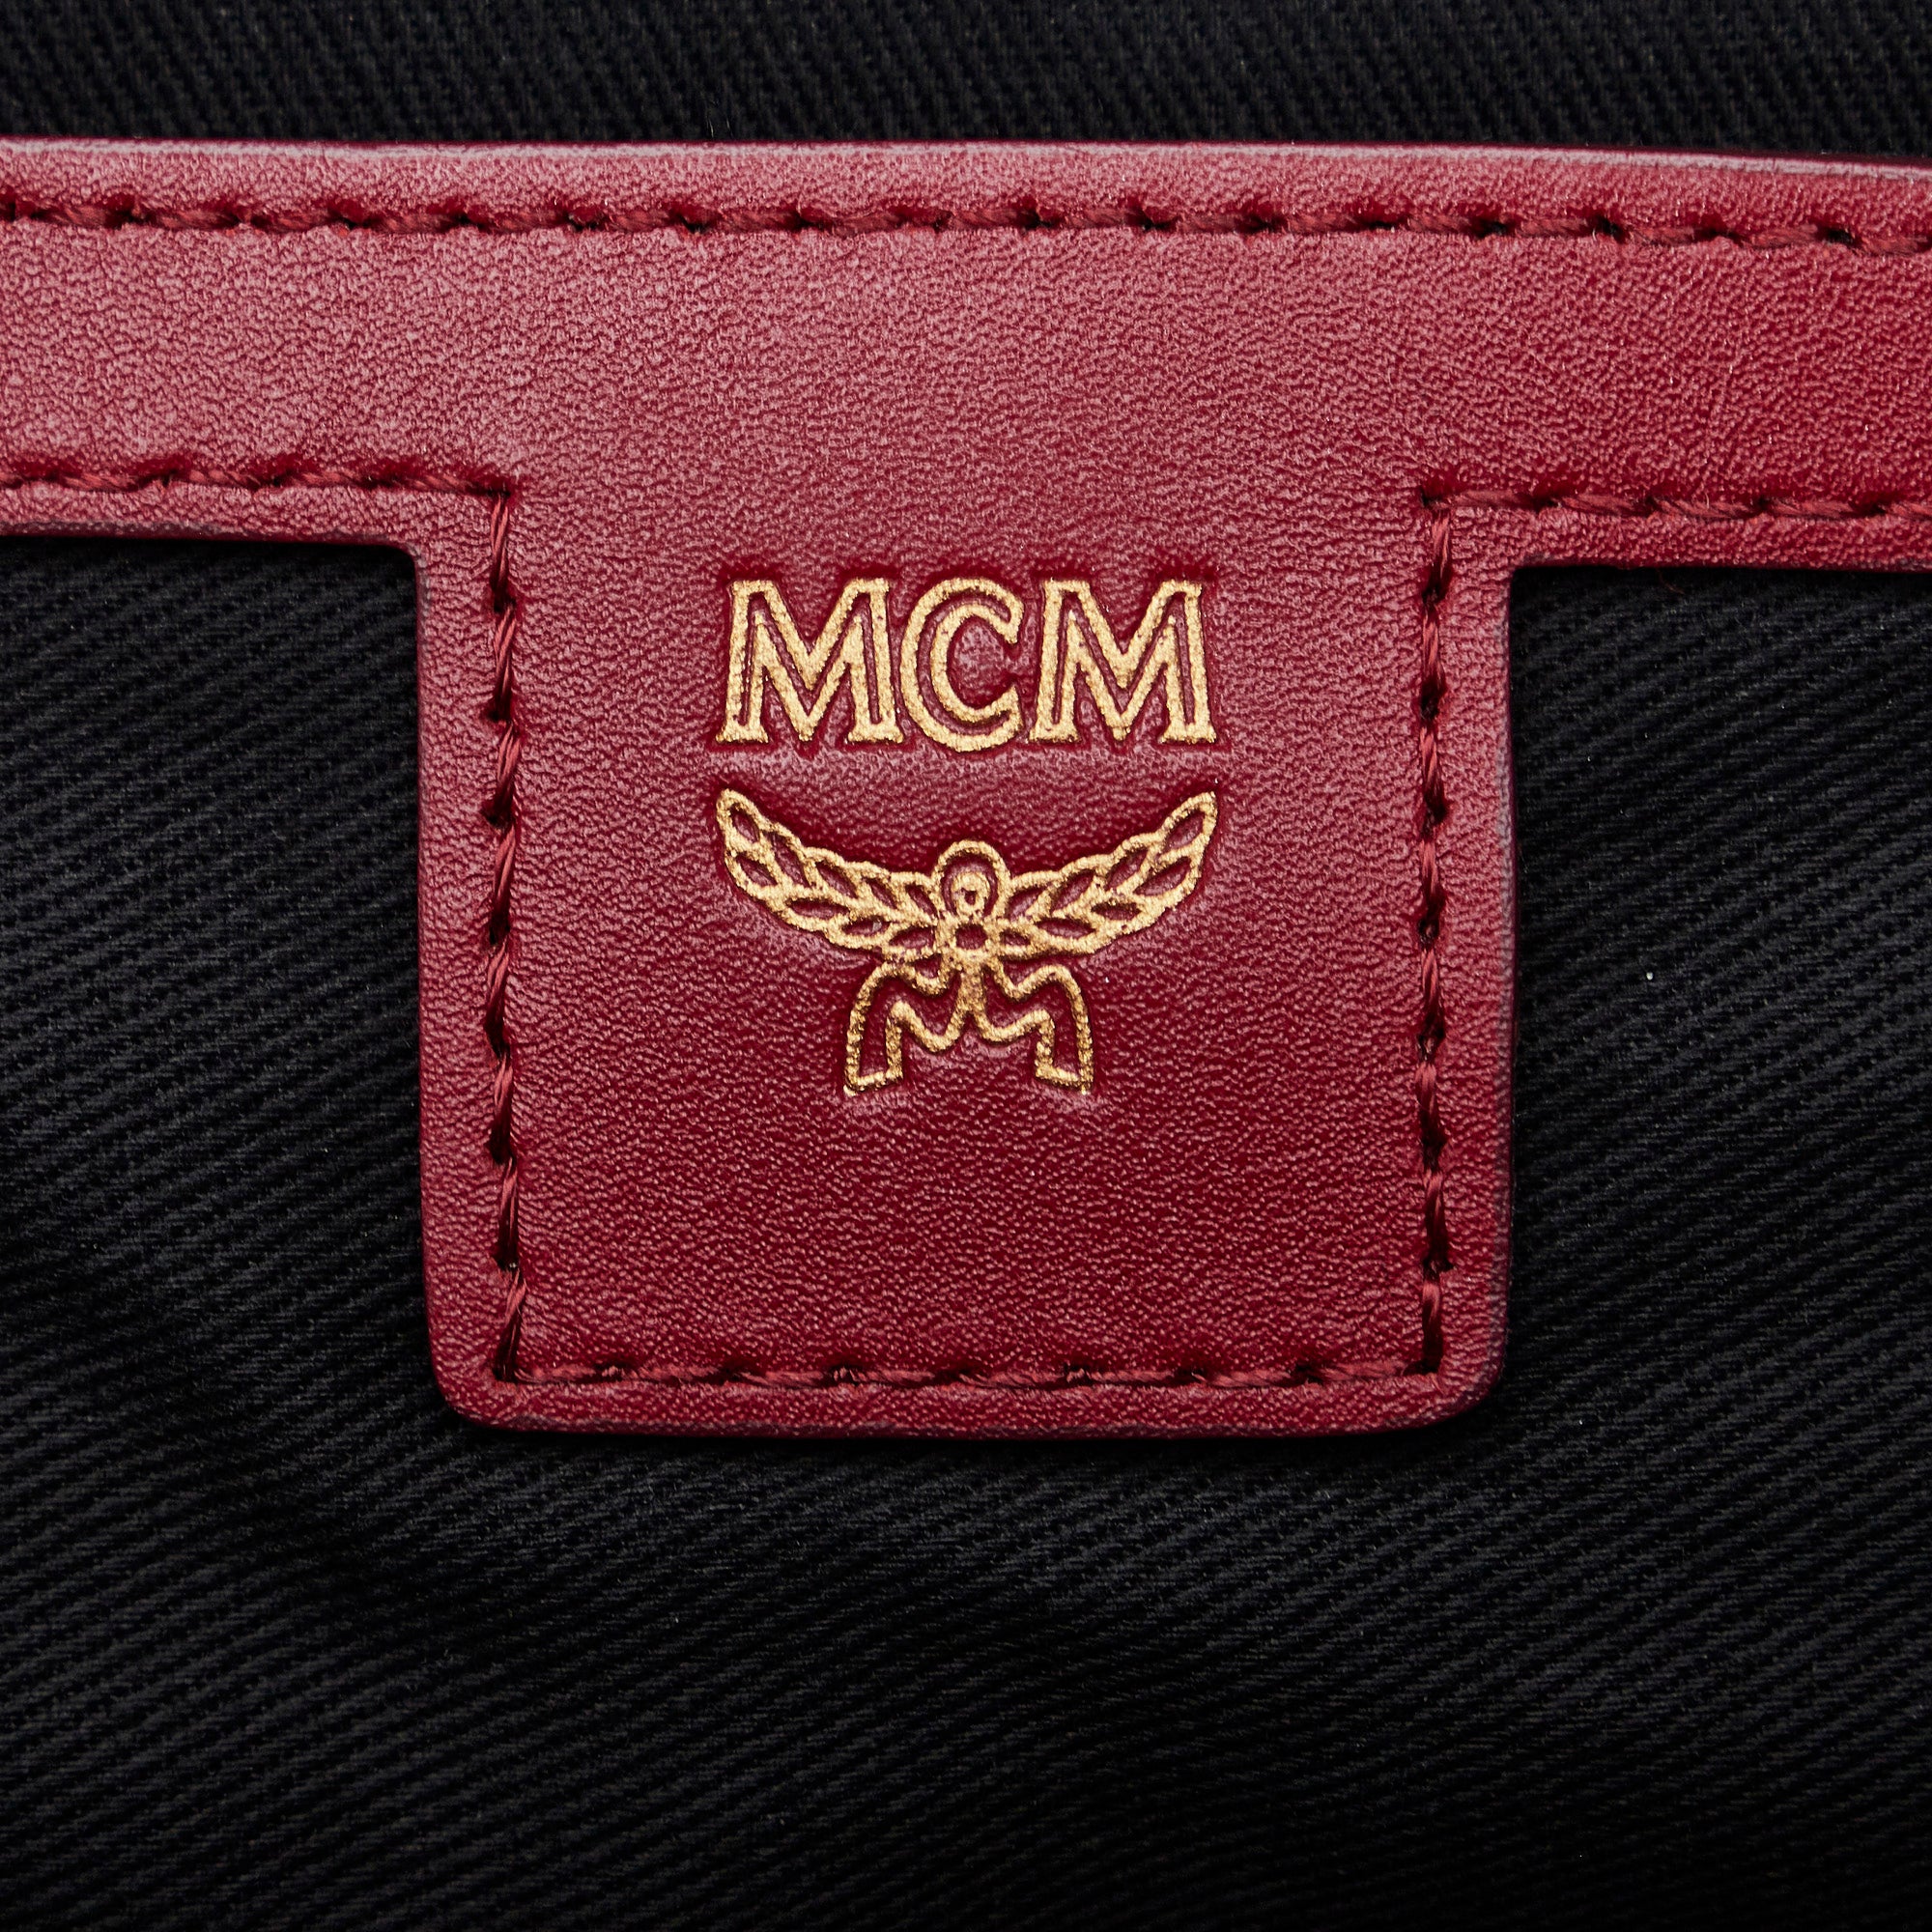 SOLD🔥🔥 Mcm Red Leather backpack  Mcm bag backpacks, Mcm bags, Leather  backpack